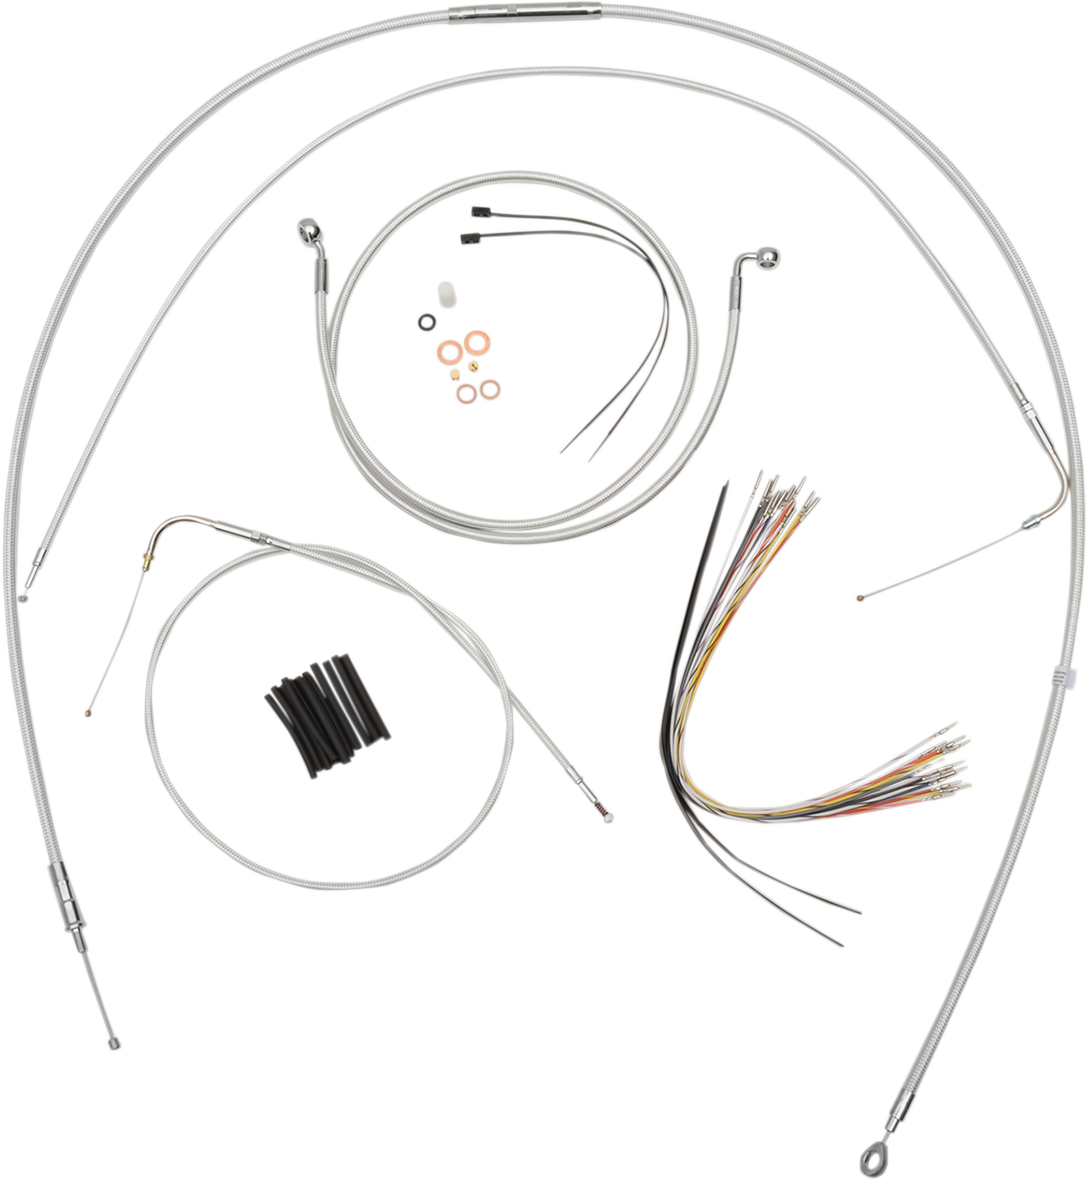 0662-0095 - MAGNUM Control Cable Kit - Sterling Chromite II? 387712